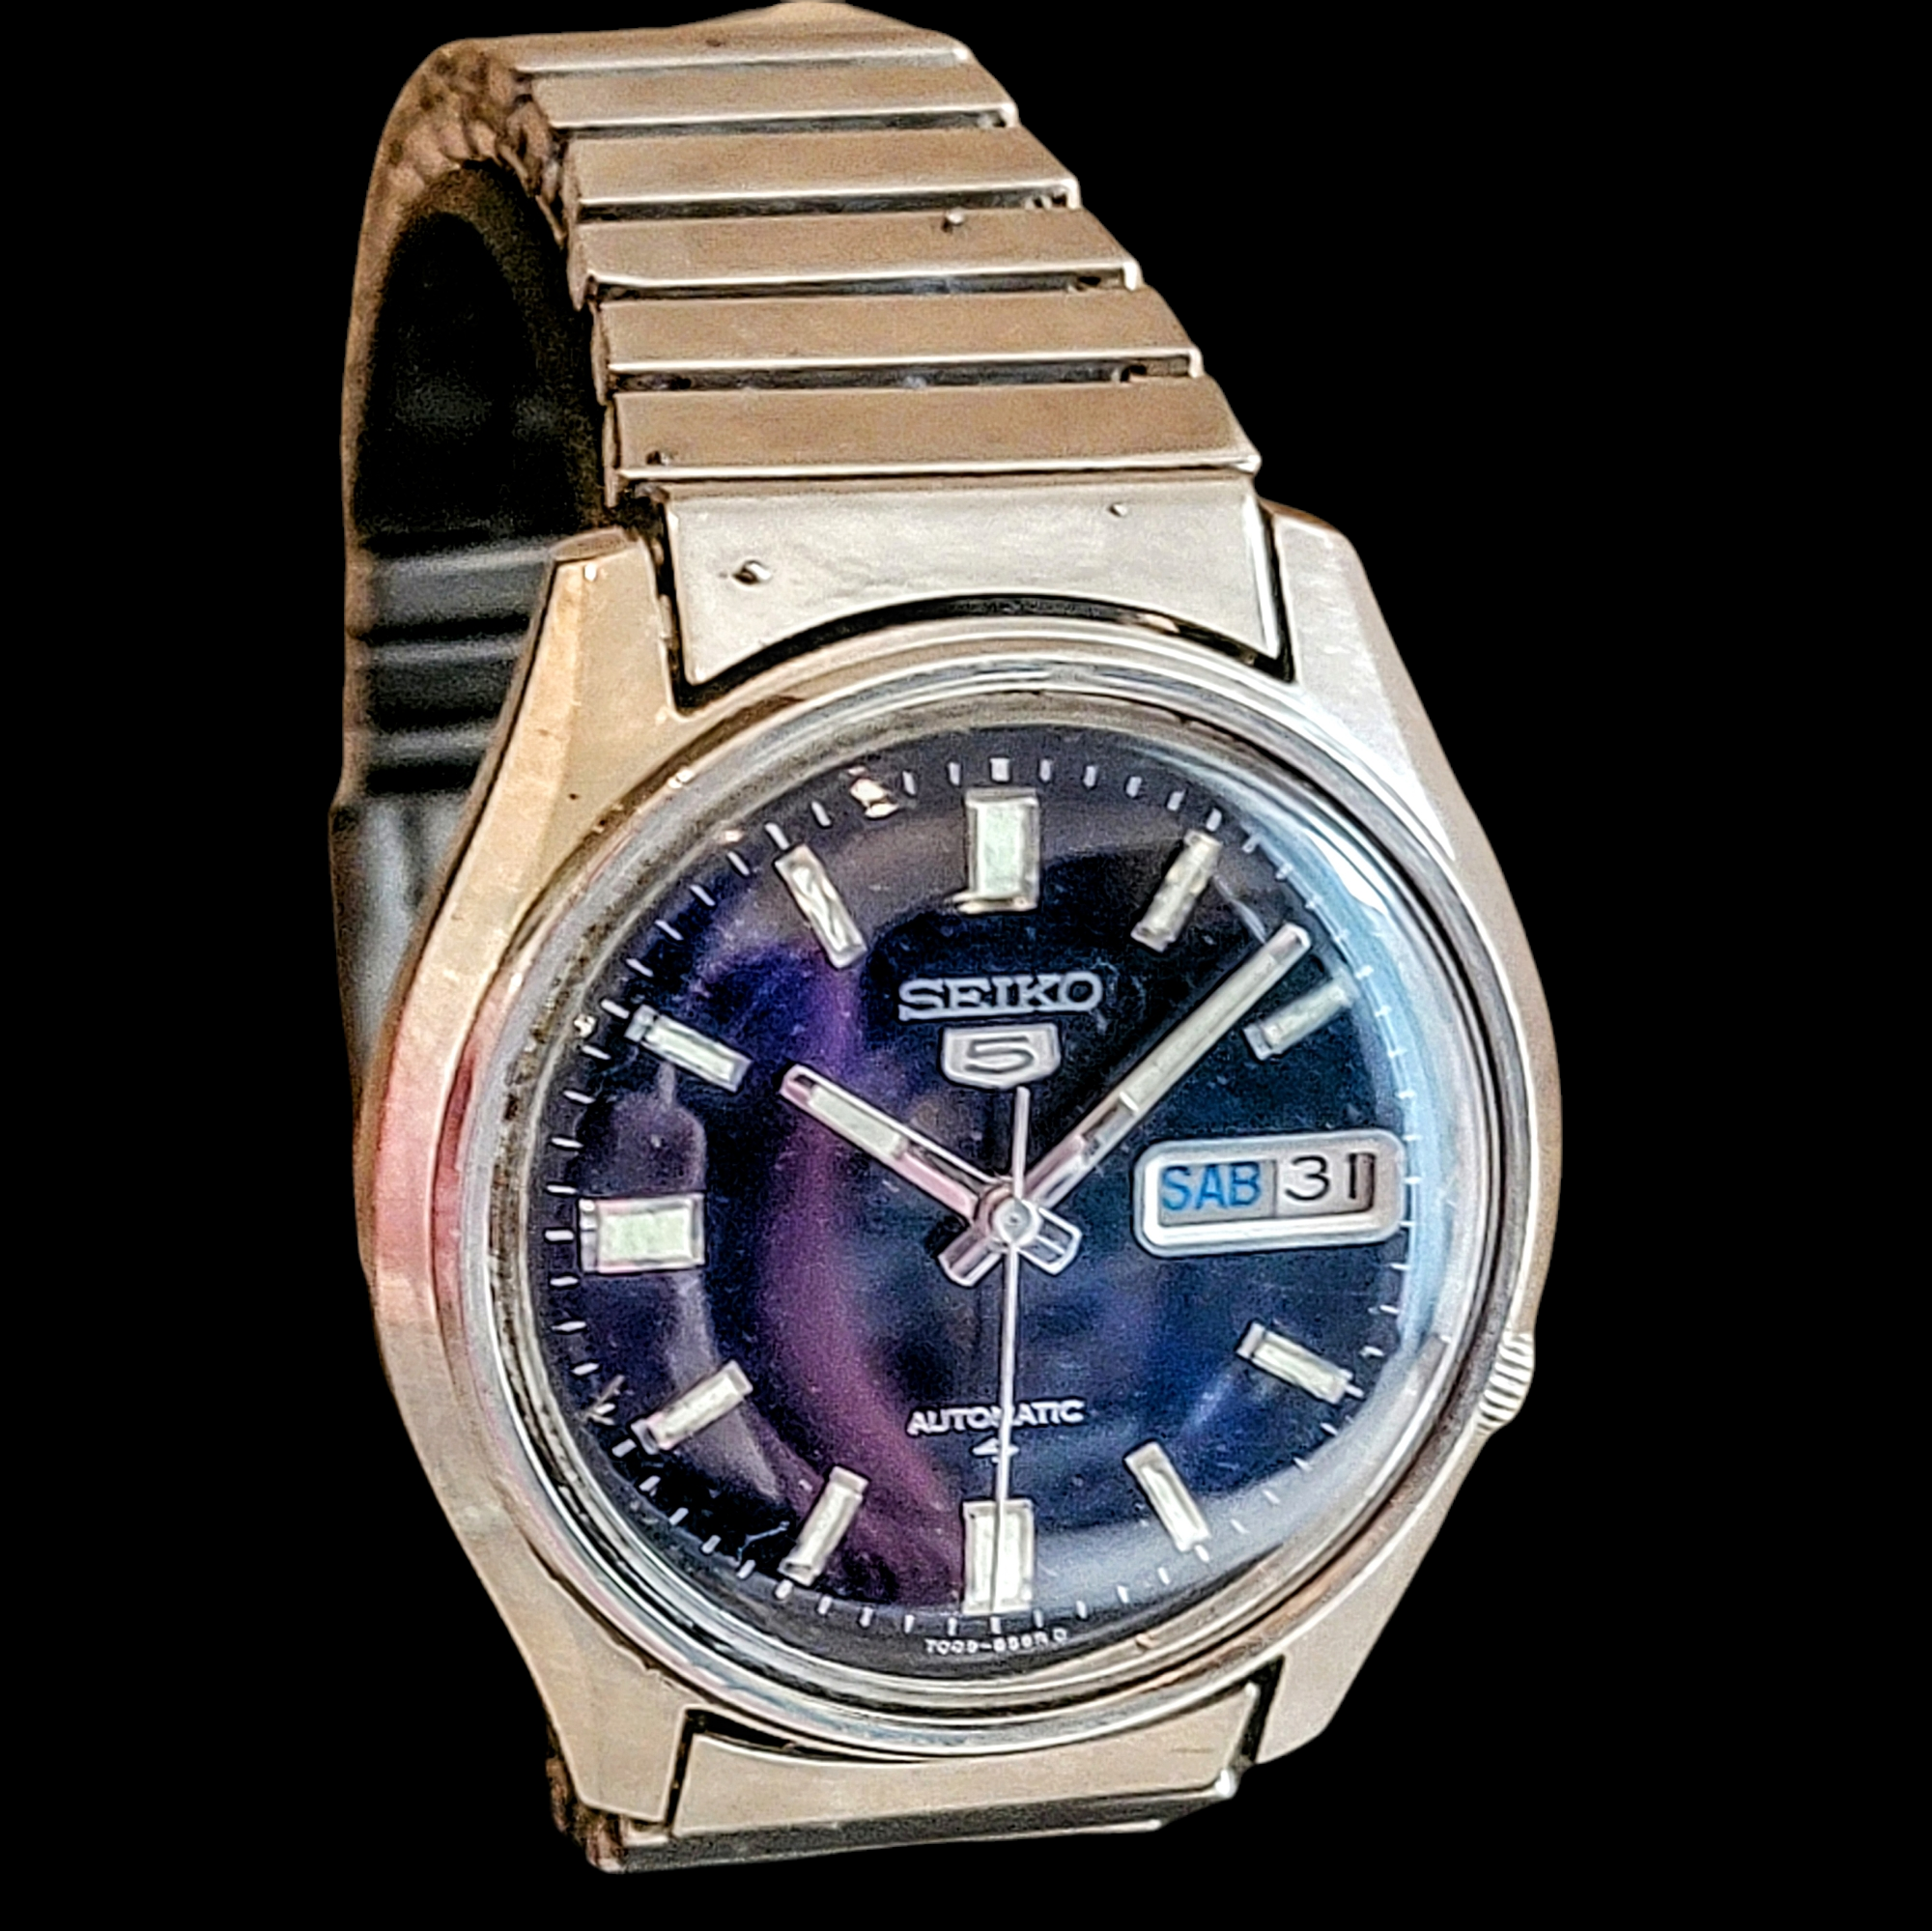 1984 SEIKO 5 Automatic Watch Day/Date Indicator 17 Jewels Cal. 7009A –  SECOND HAND HOROLOGY